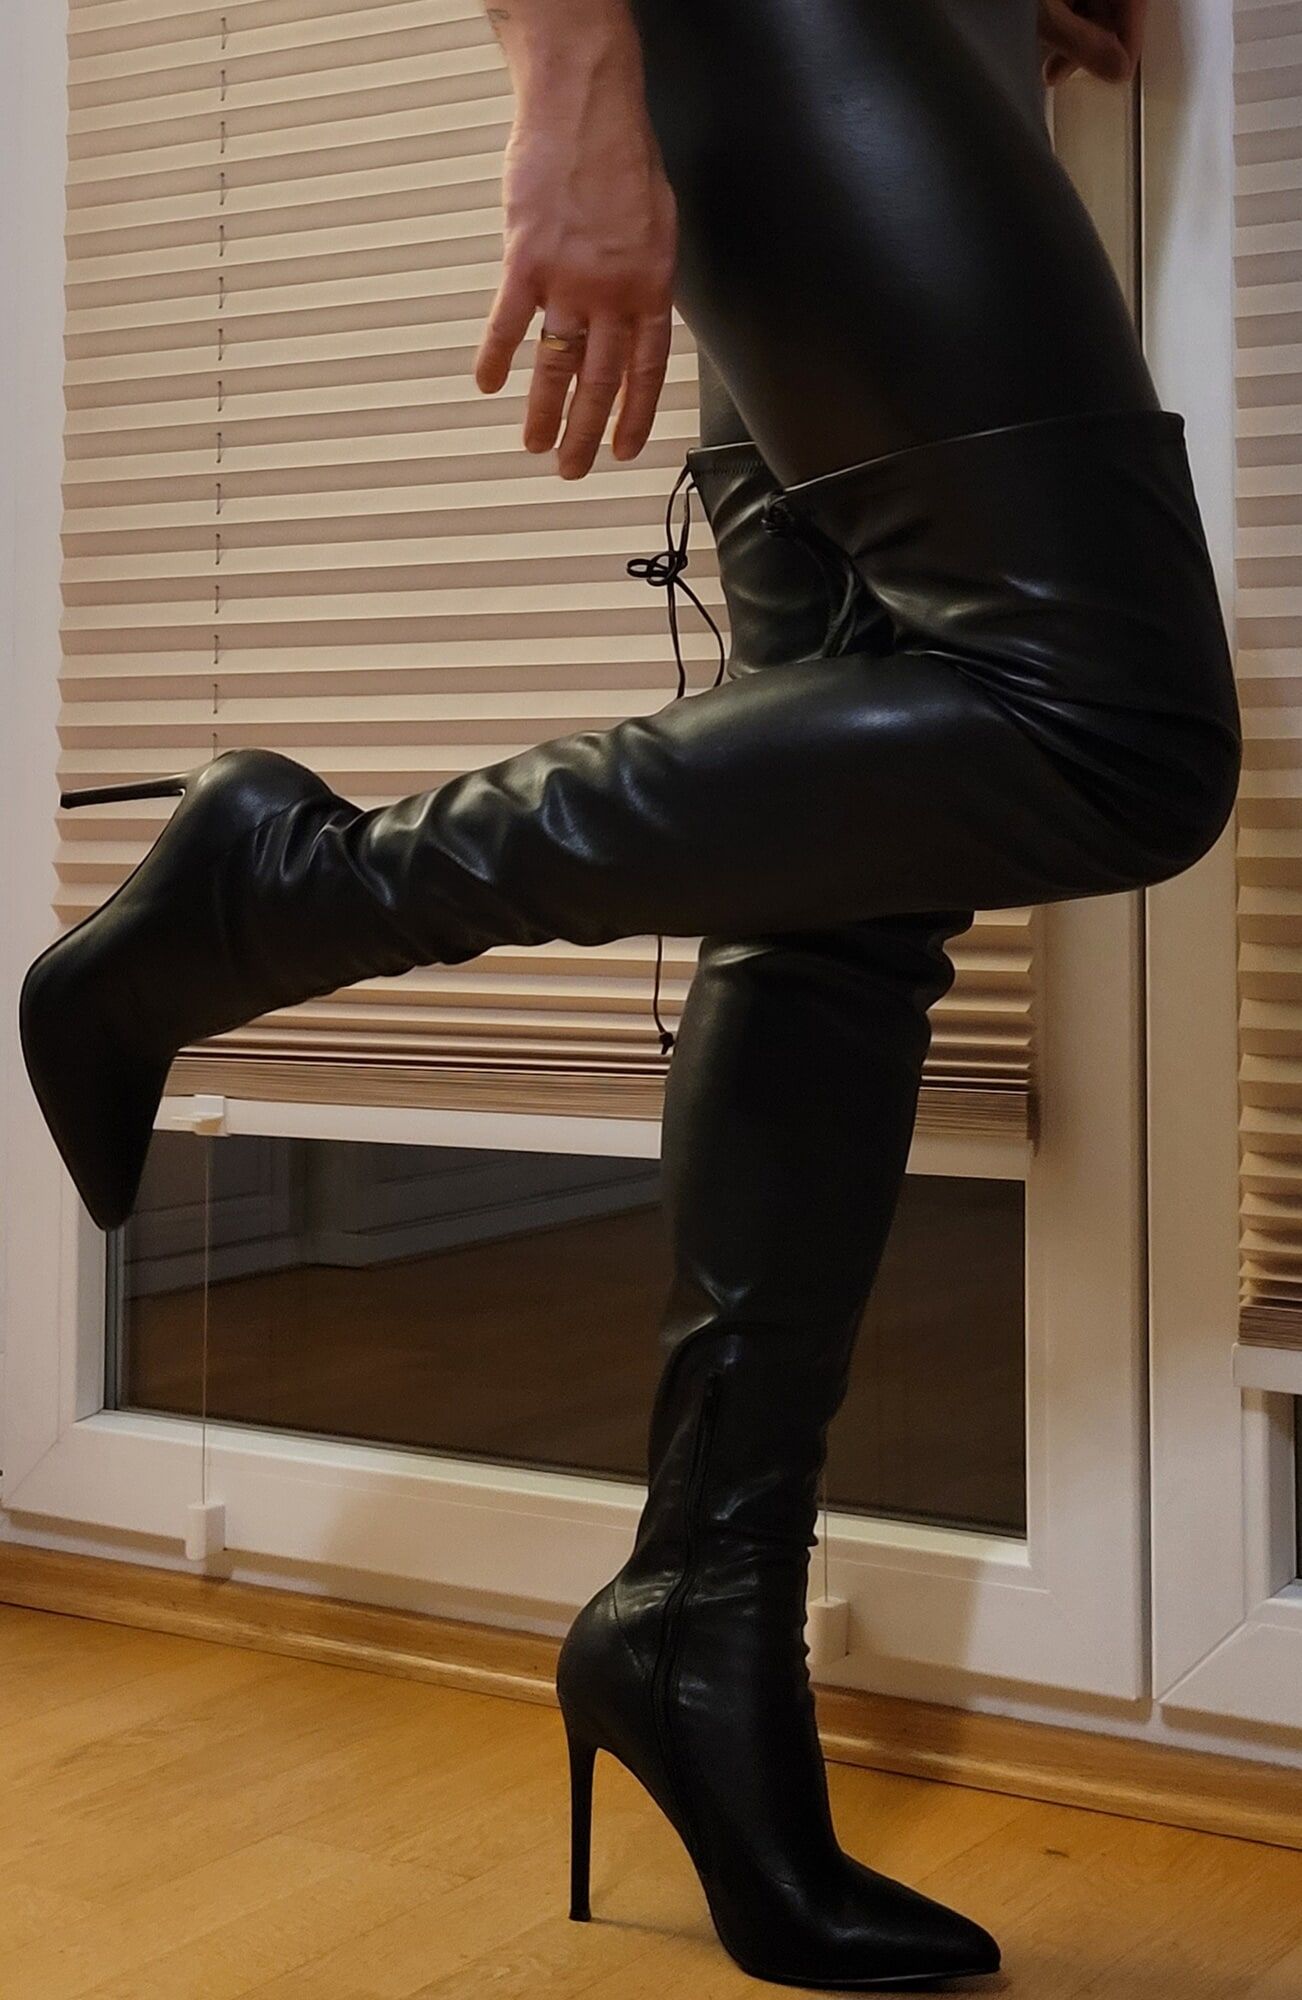 Me in Shiny Leggins and Overknee Boots  #4